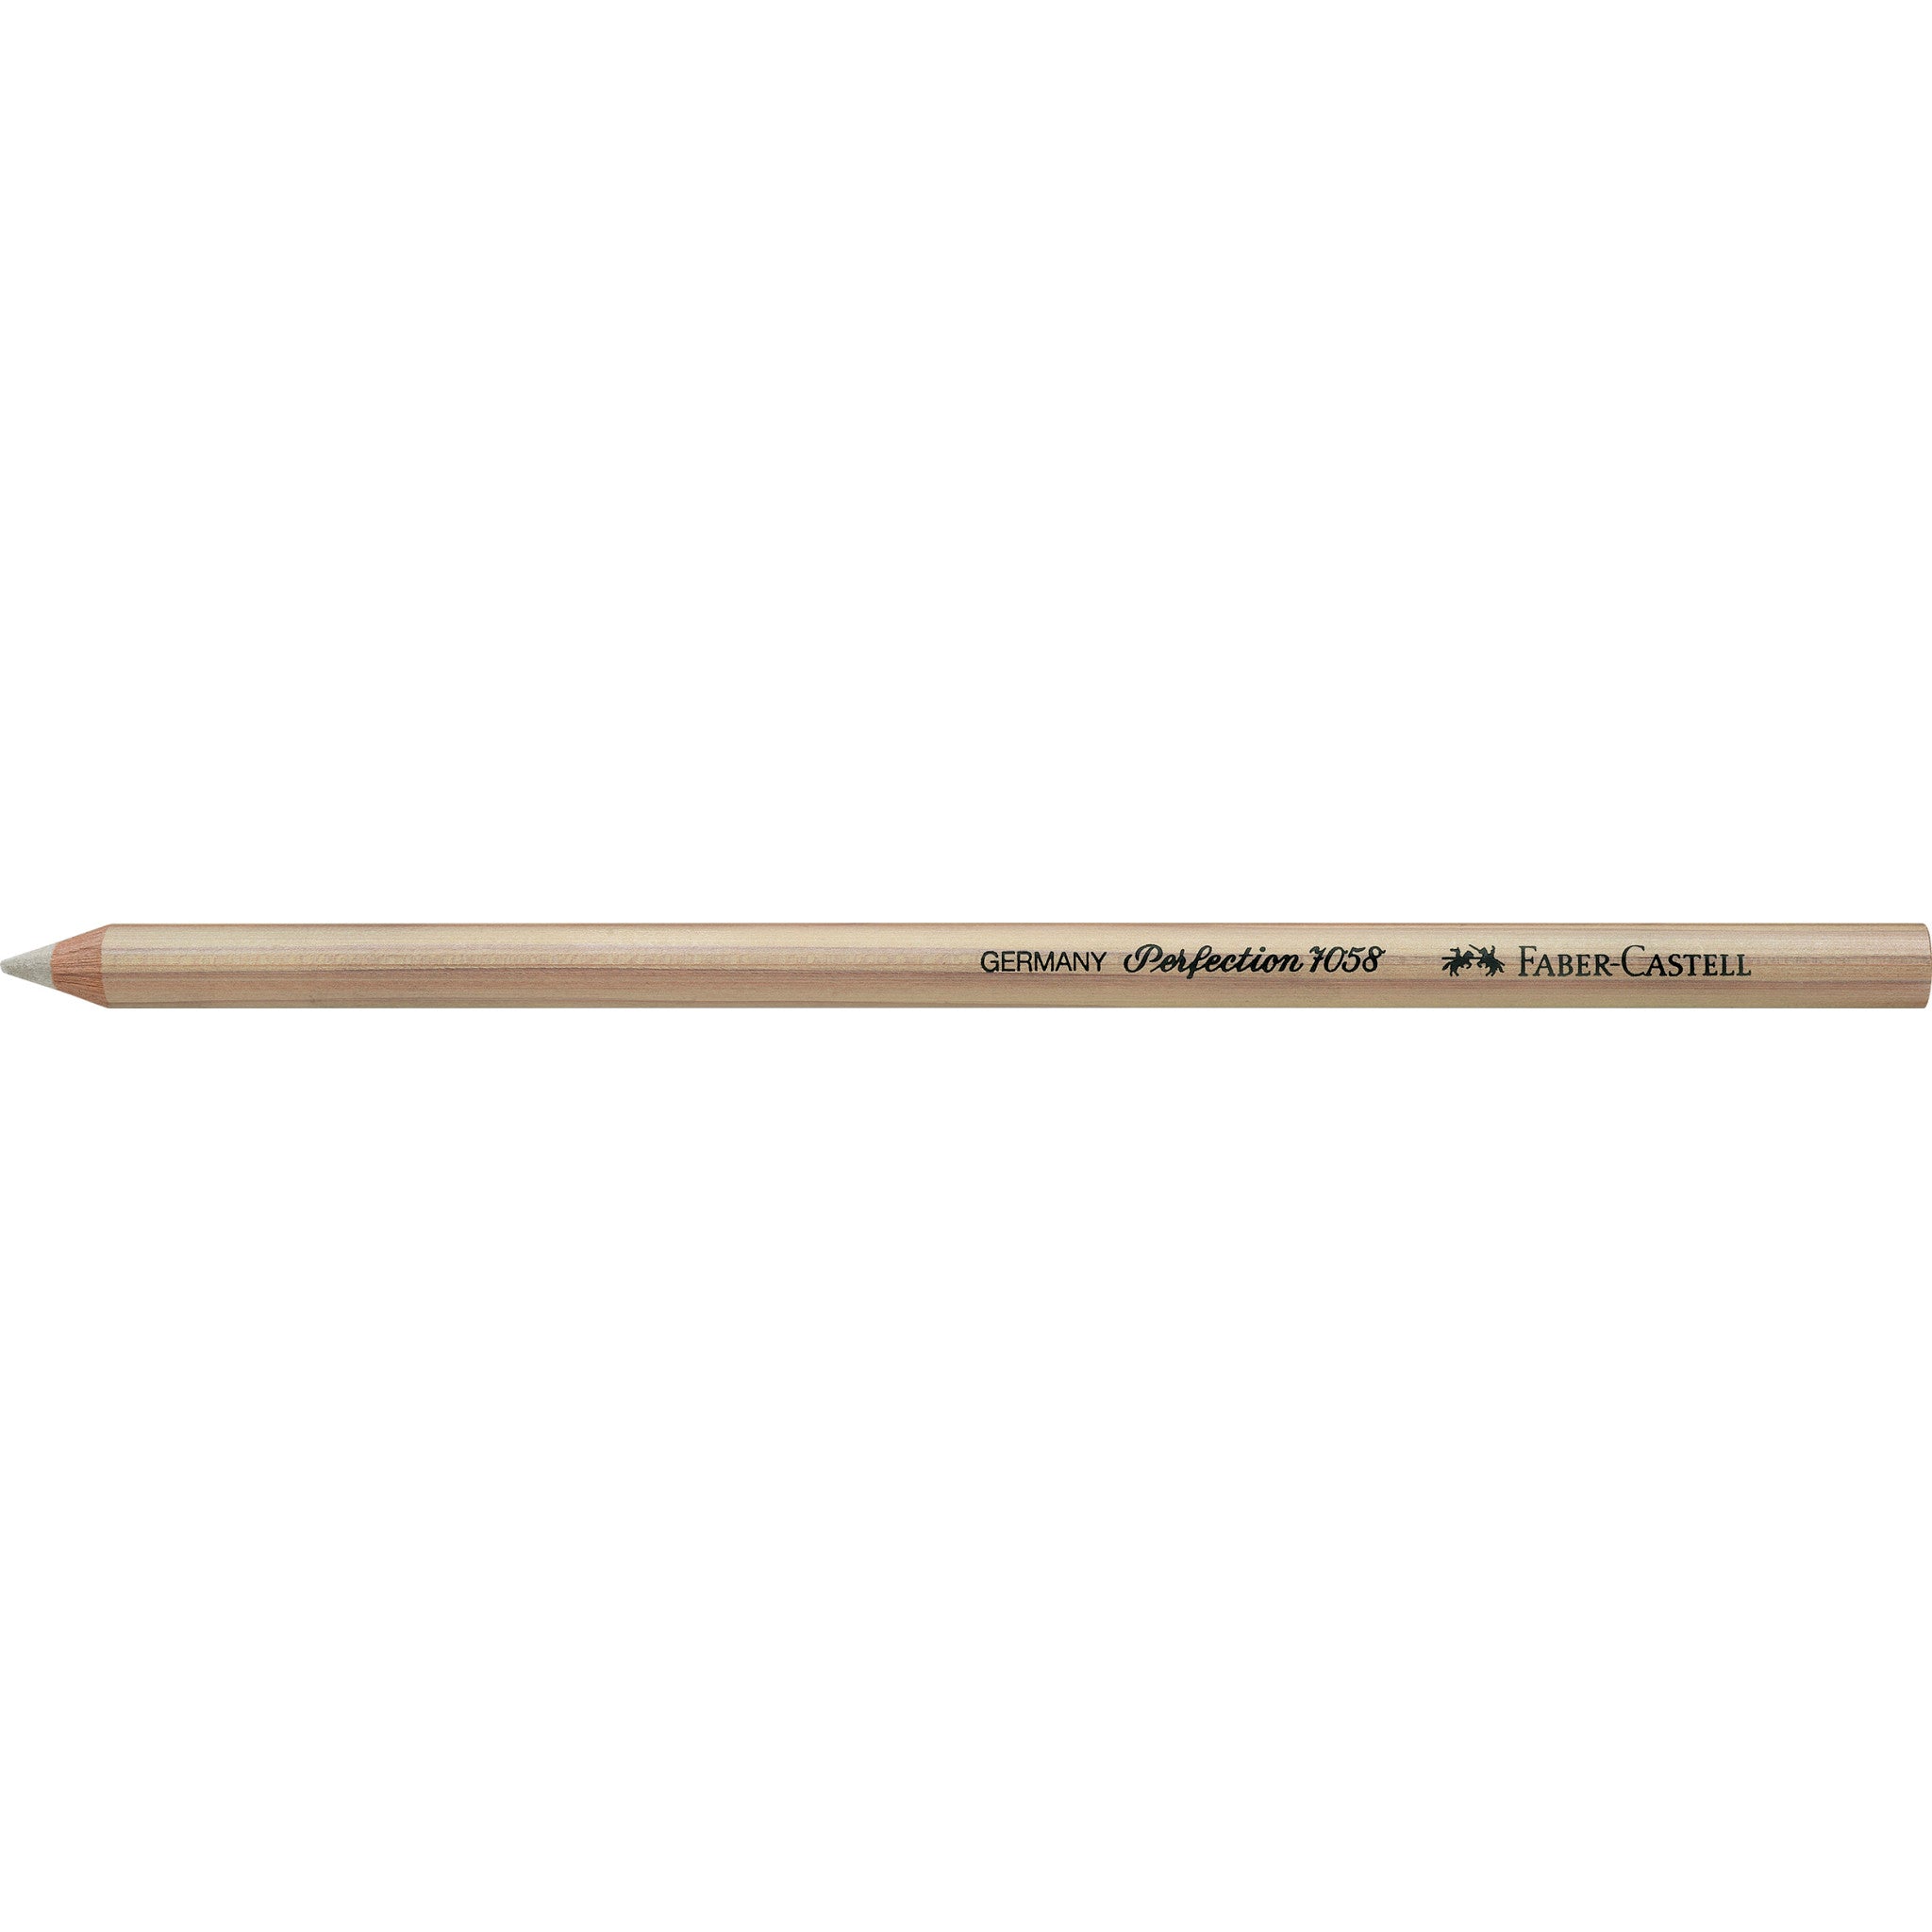 Perfection Eraser Pencil 7058 (For Ink and Typewriter)